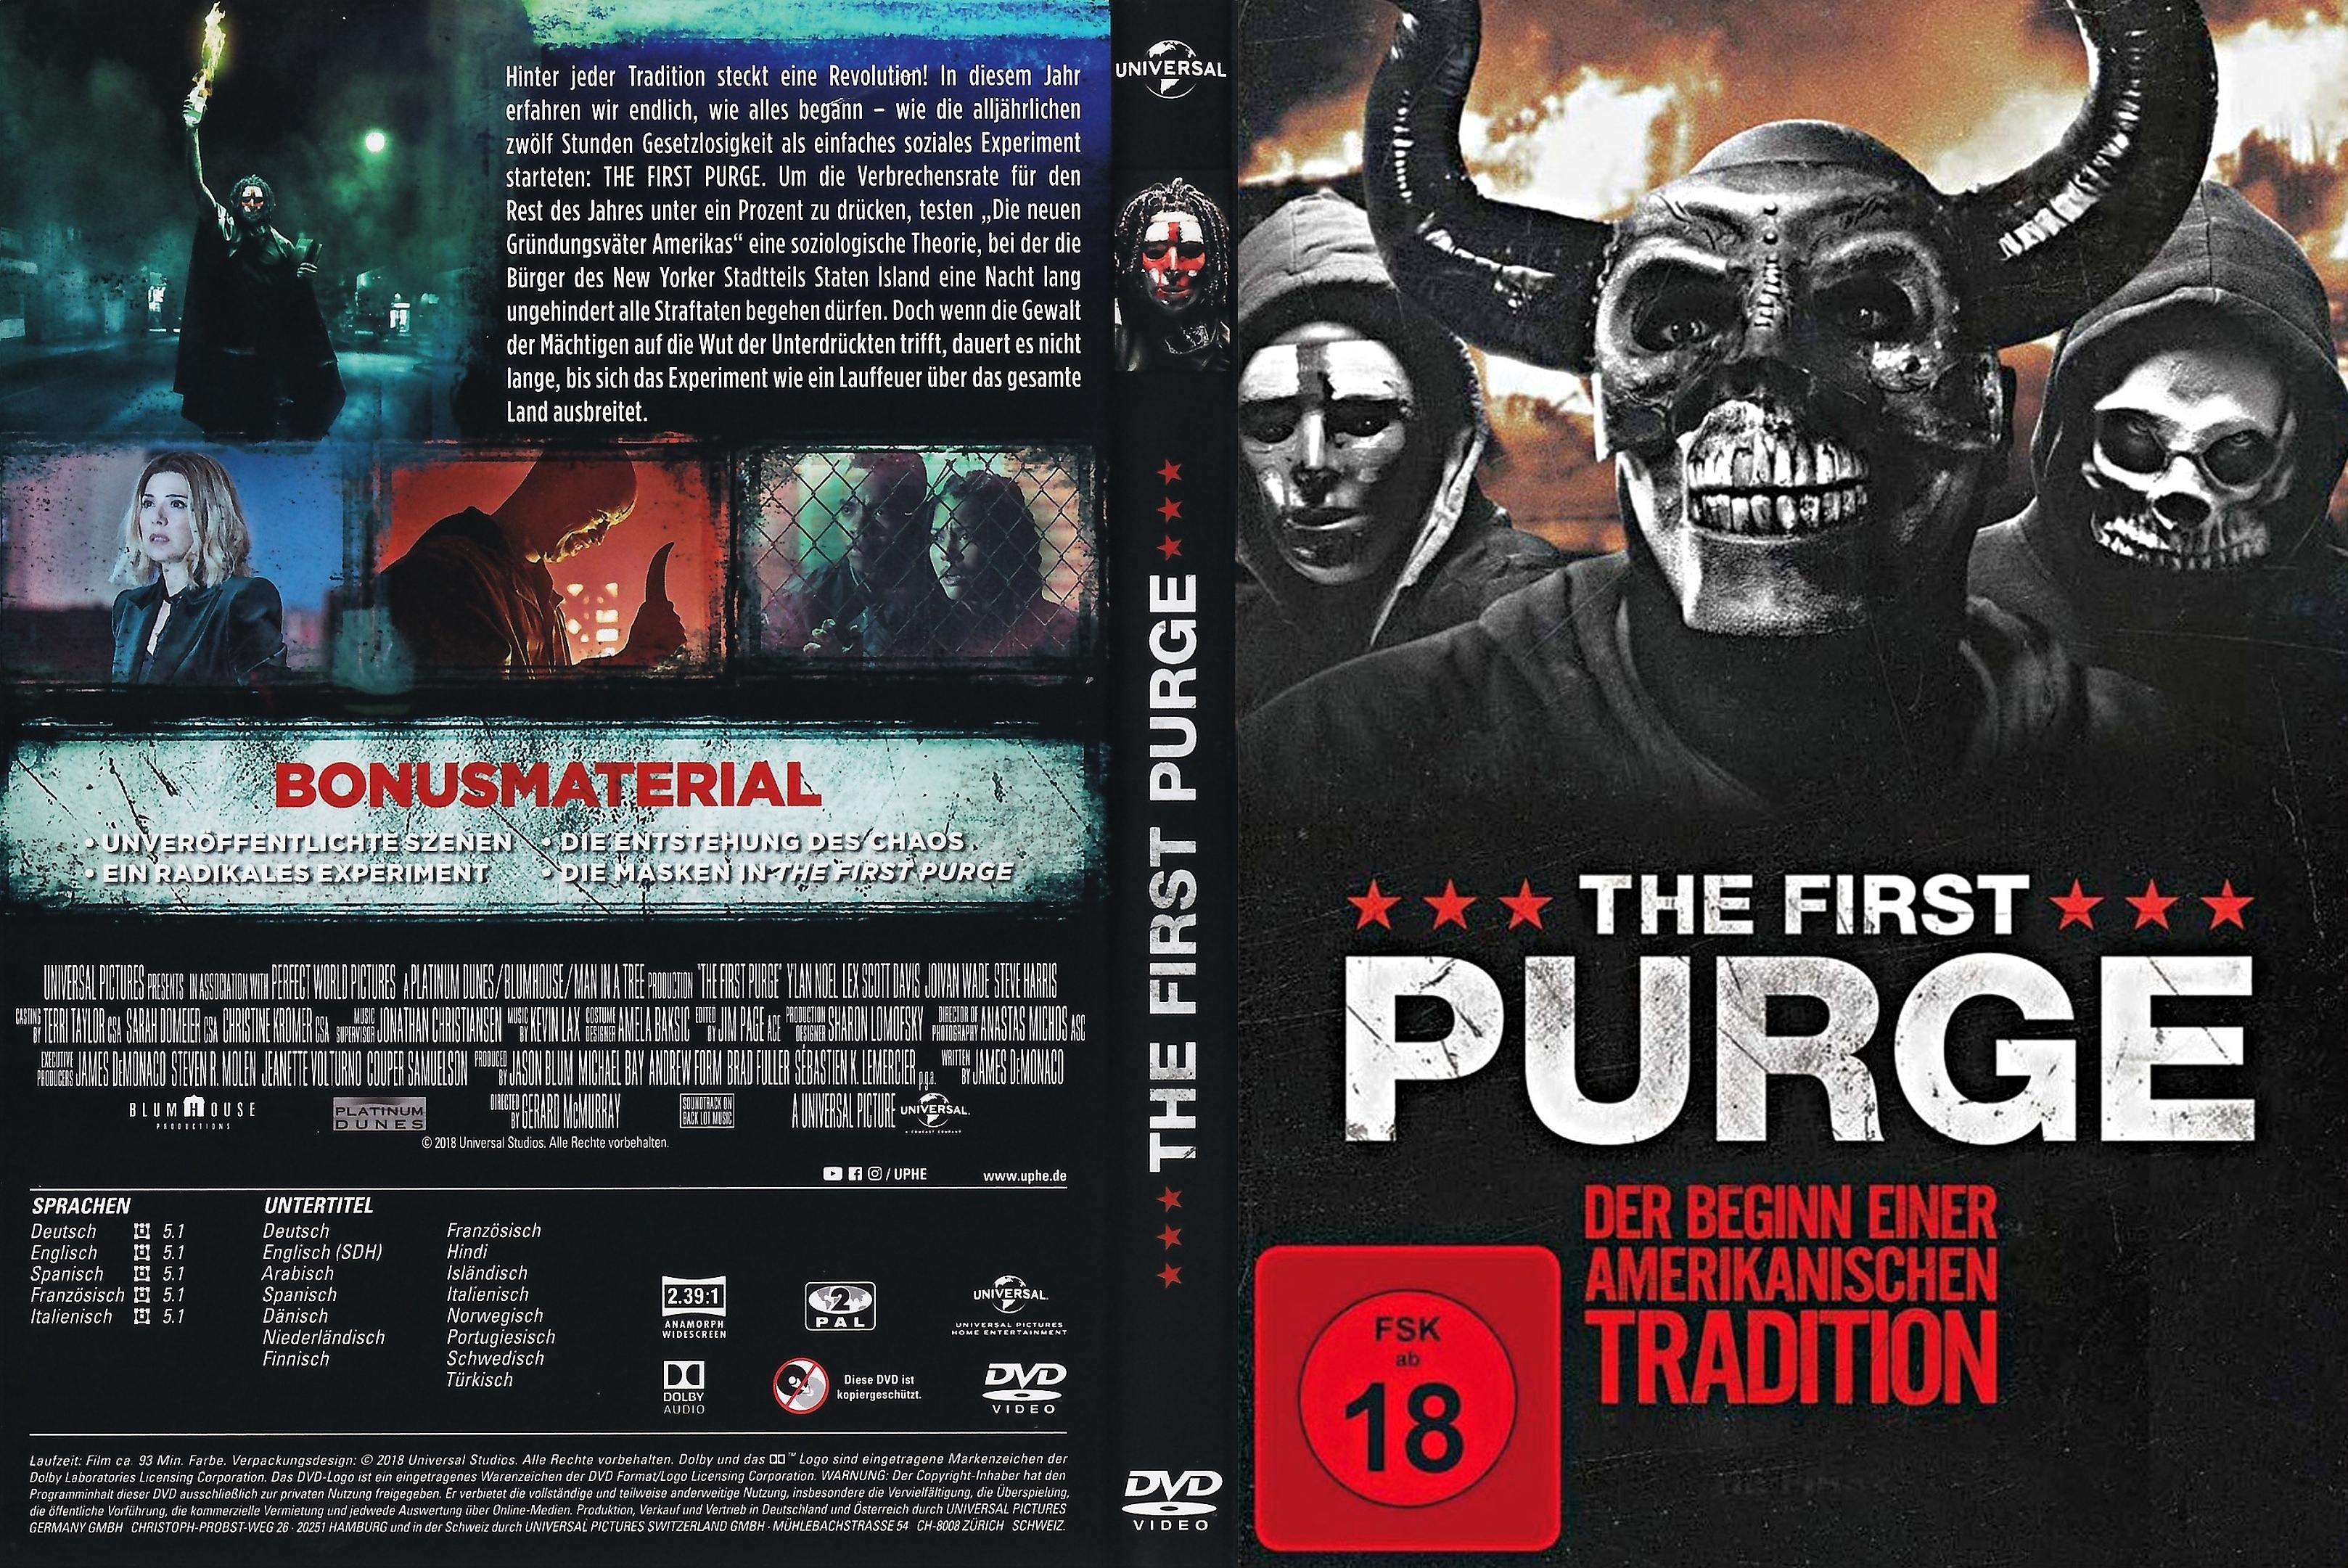 The First Purge 2018 Movie Poster Wallpapers